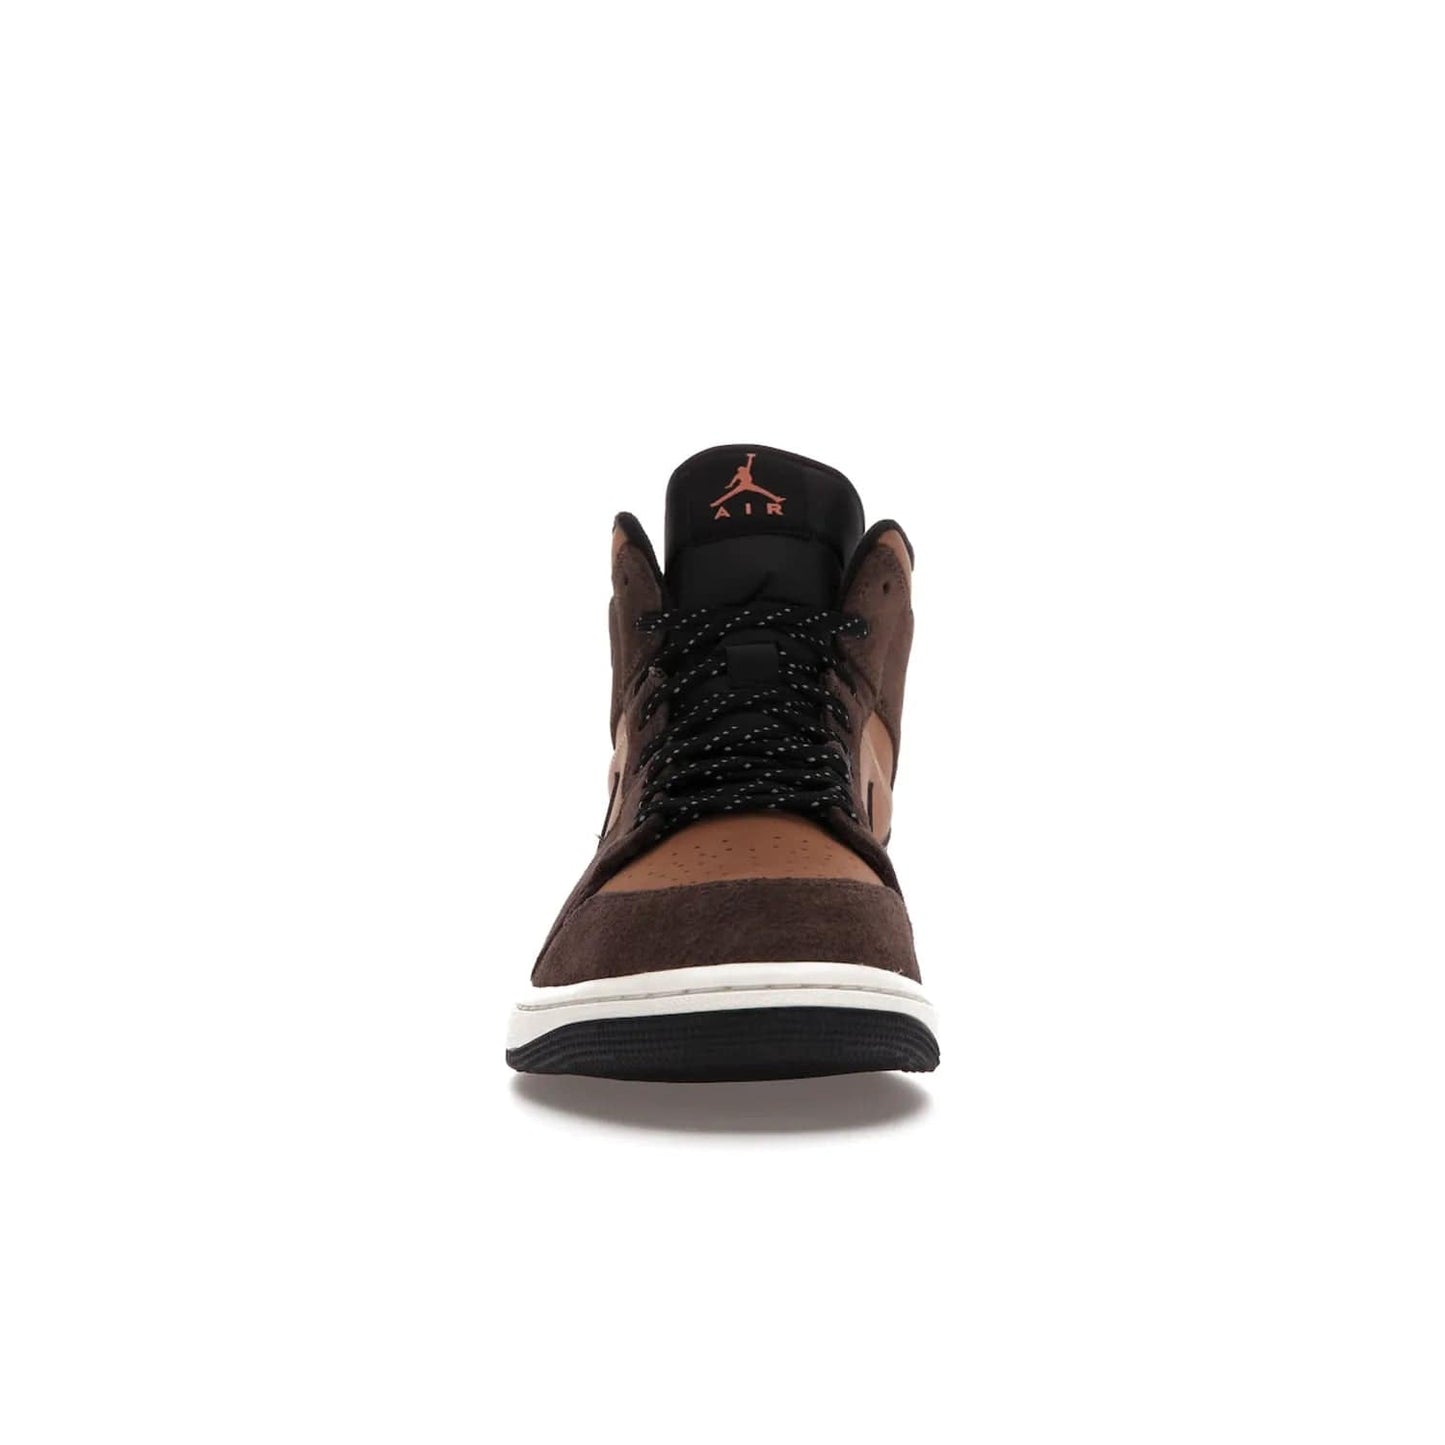 Jordan 1 Mid SE Dark Chocolate - Image 10 - Only at www.BallersClubKickz.com - This fashionable and functional Jordan 1 Mid SE Dark Chocolate features a light brown Durabuck upper, dark brown suede overlays, black Swoosh logos and reflective patch at heel. A must-have for any sneakerhead!